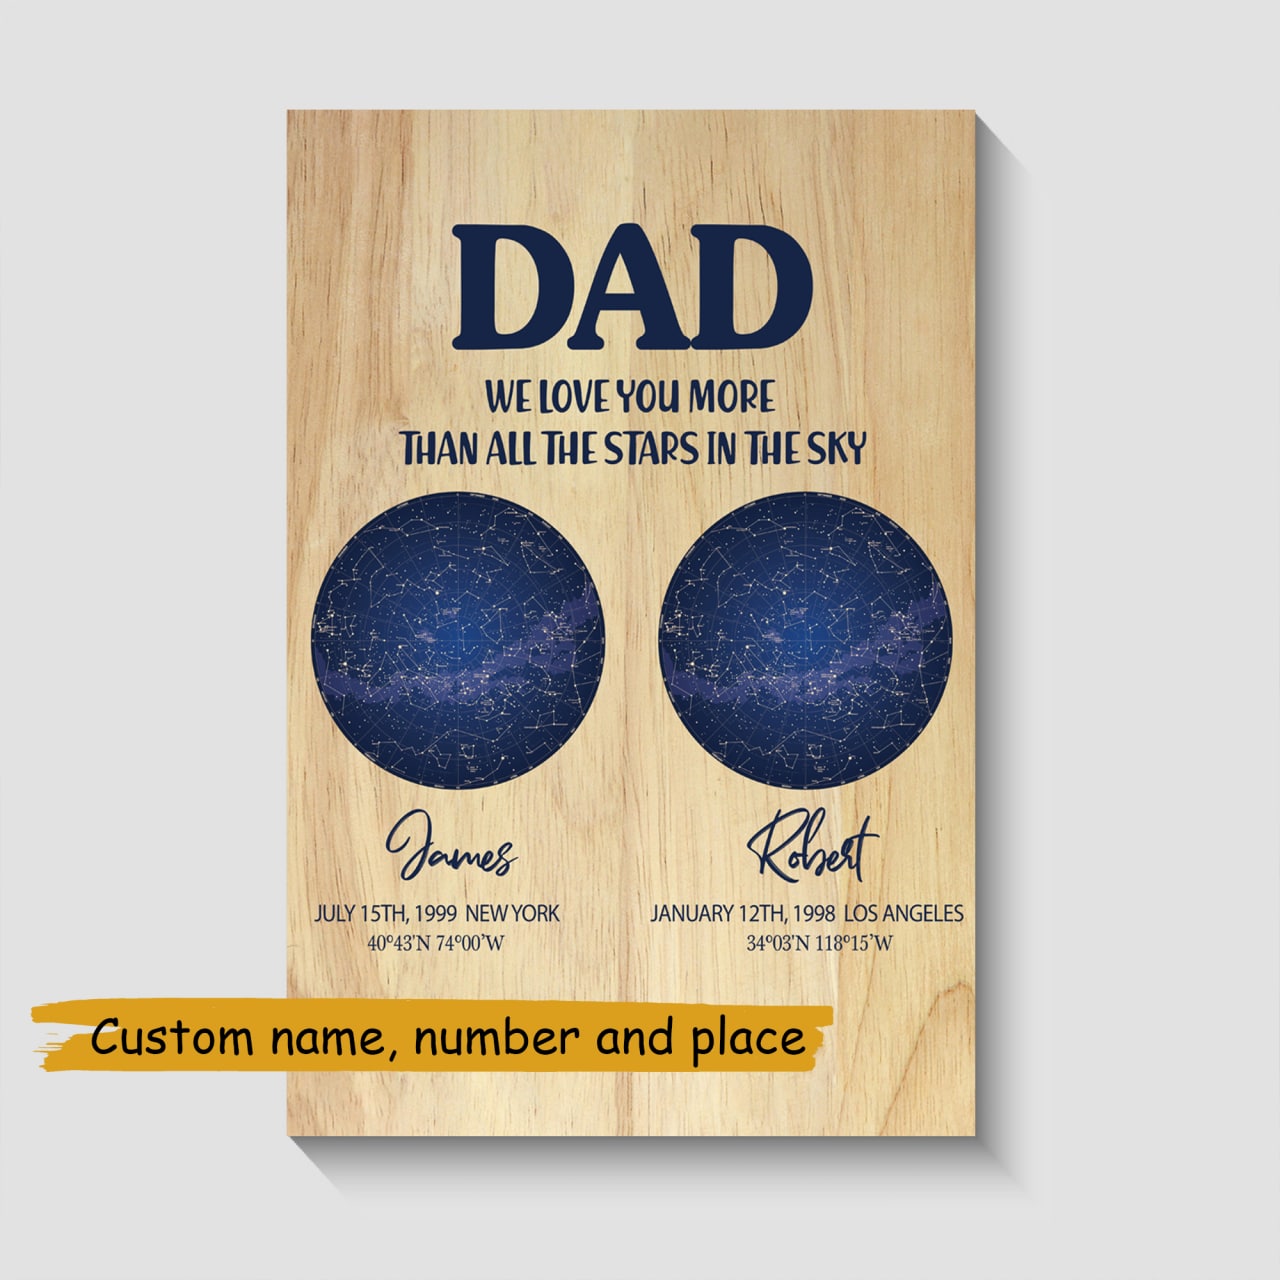 Dad We Love You More Than All The Stars In The Sky Personalized Canvas